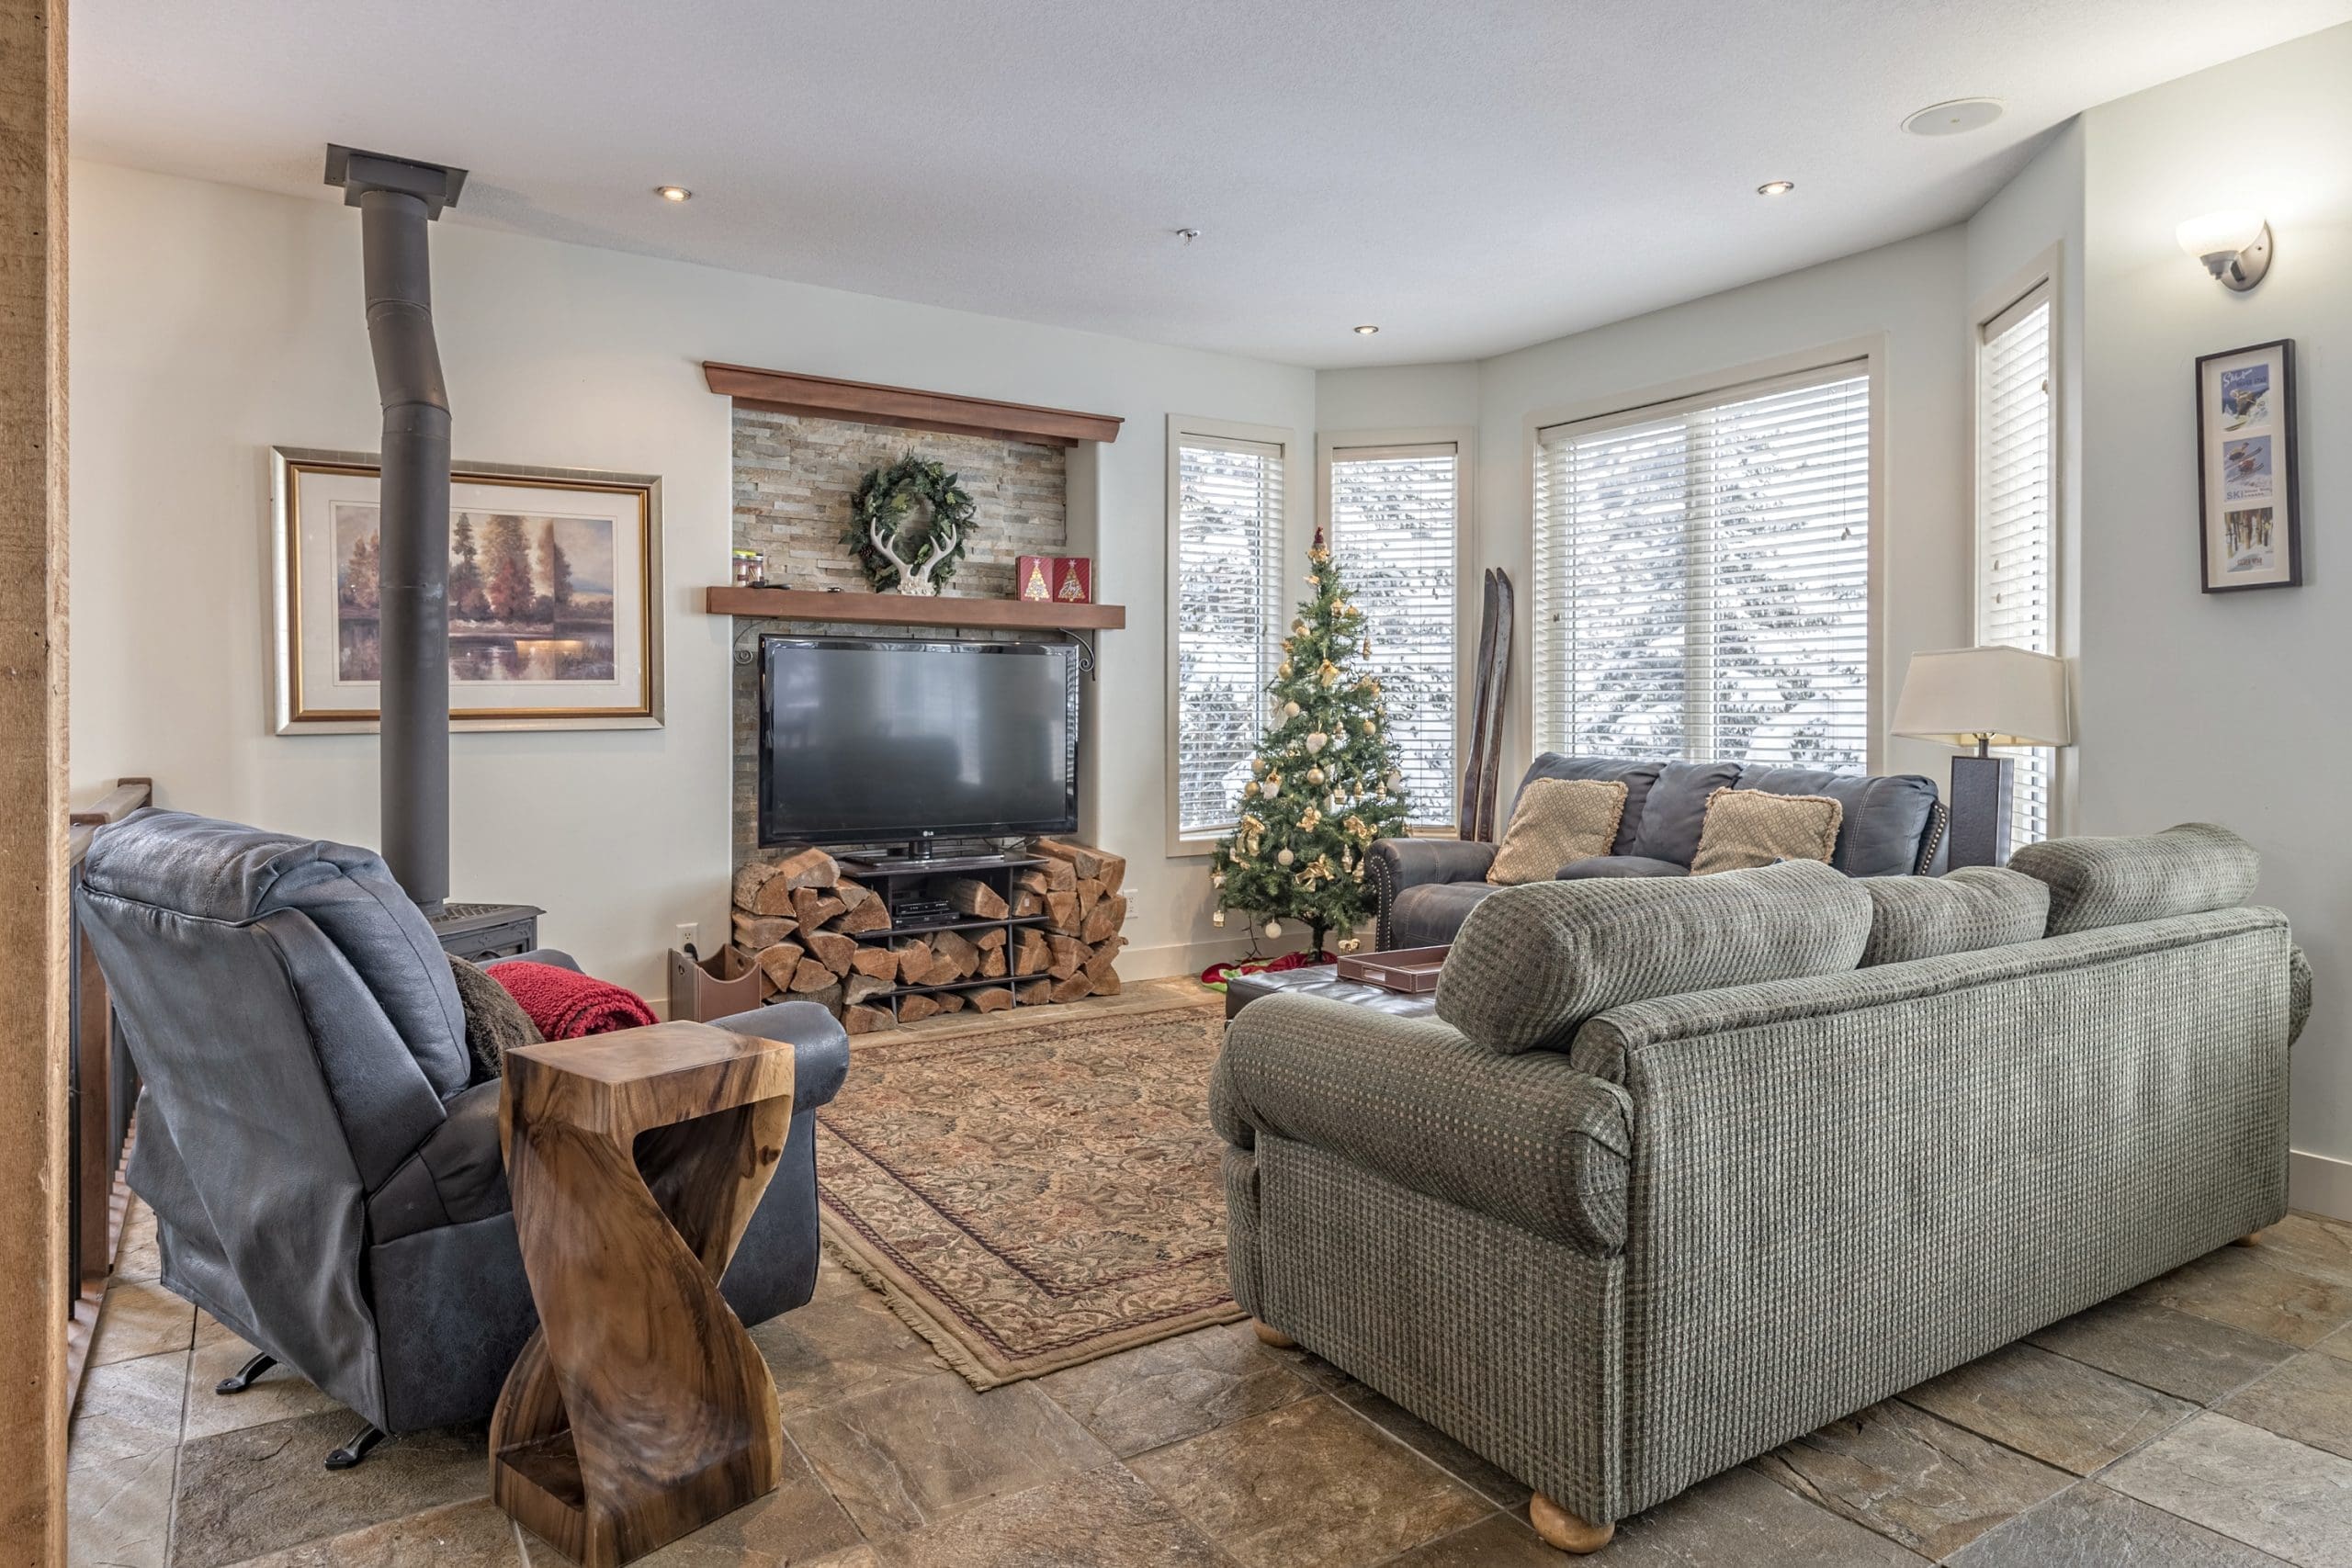 Upper living room with gas fireplace. Two levels of living for families and friends to spread out. Great views of the Monashee Mountains. Private hot tub, laundry, BBQ, ski room and garage. It's pet-friendly too!